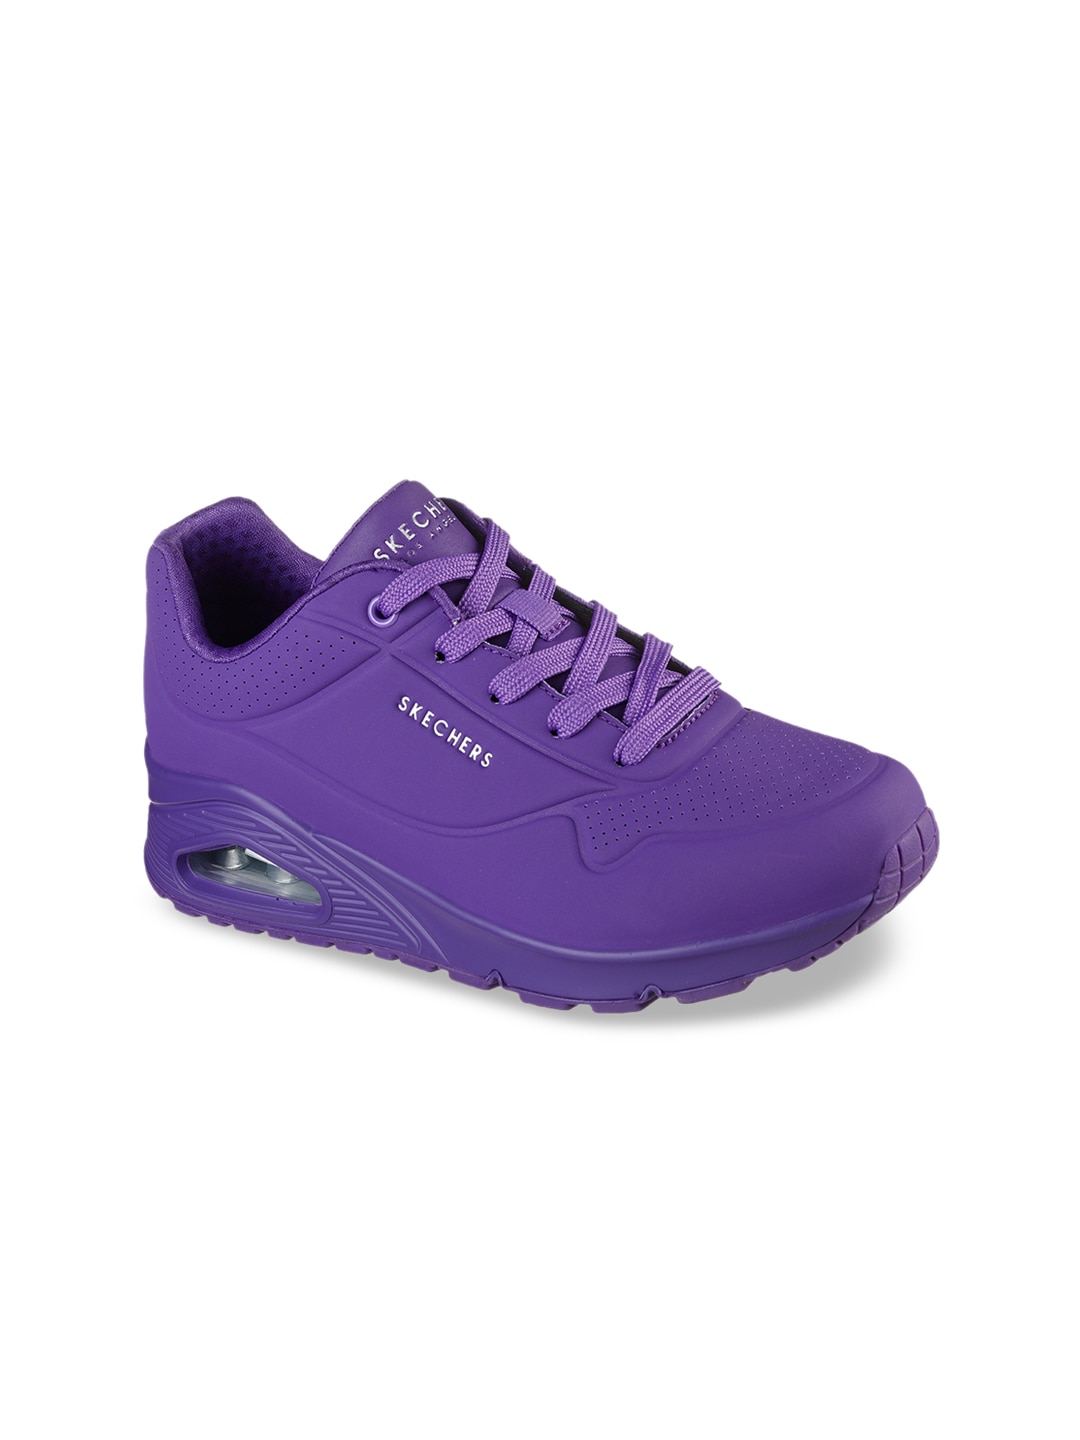 Skechers Women Purple Lace-Up Everyday Sneakers Price in India